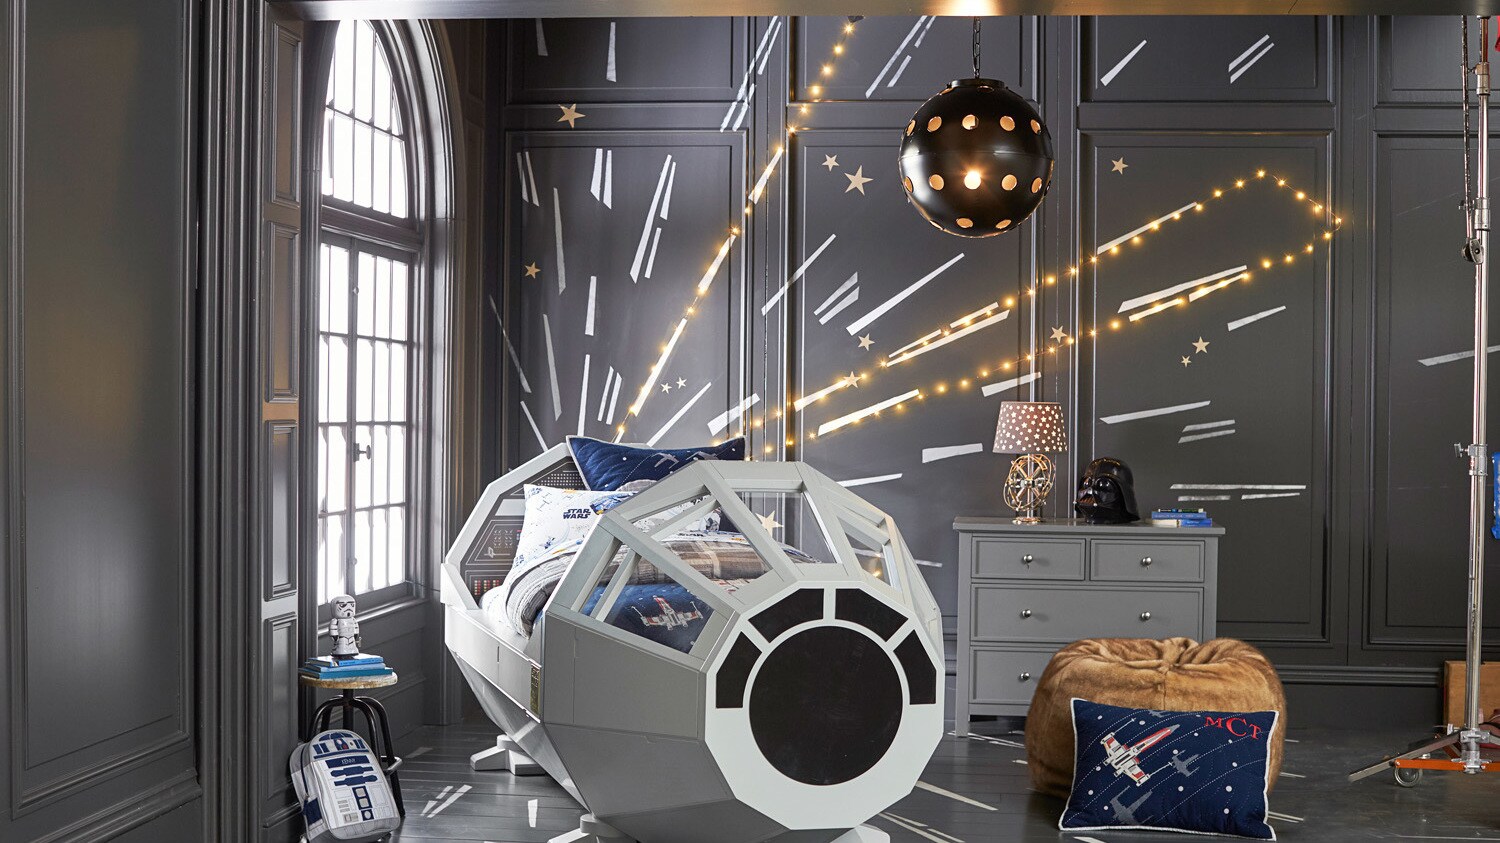 Pottery Barn Brings the Force to Home Decor